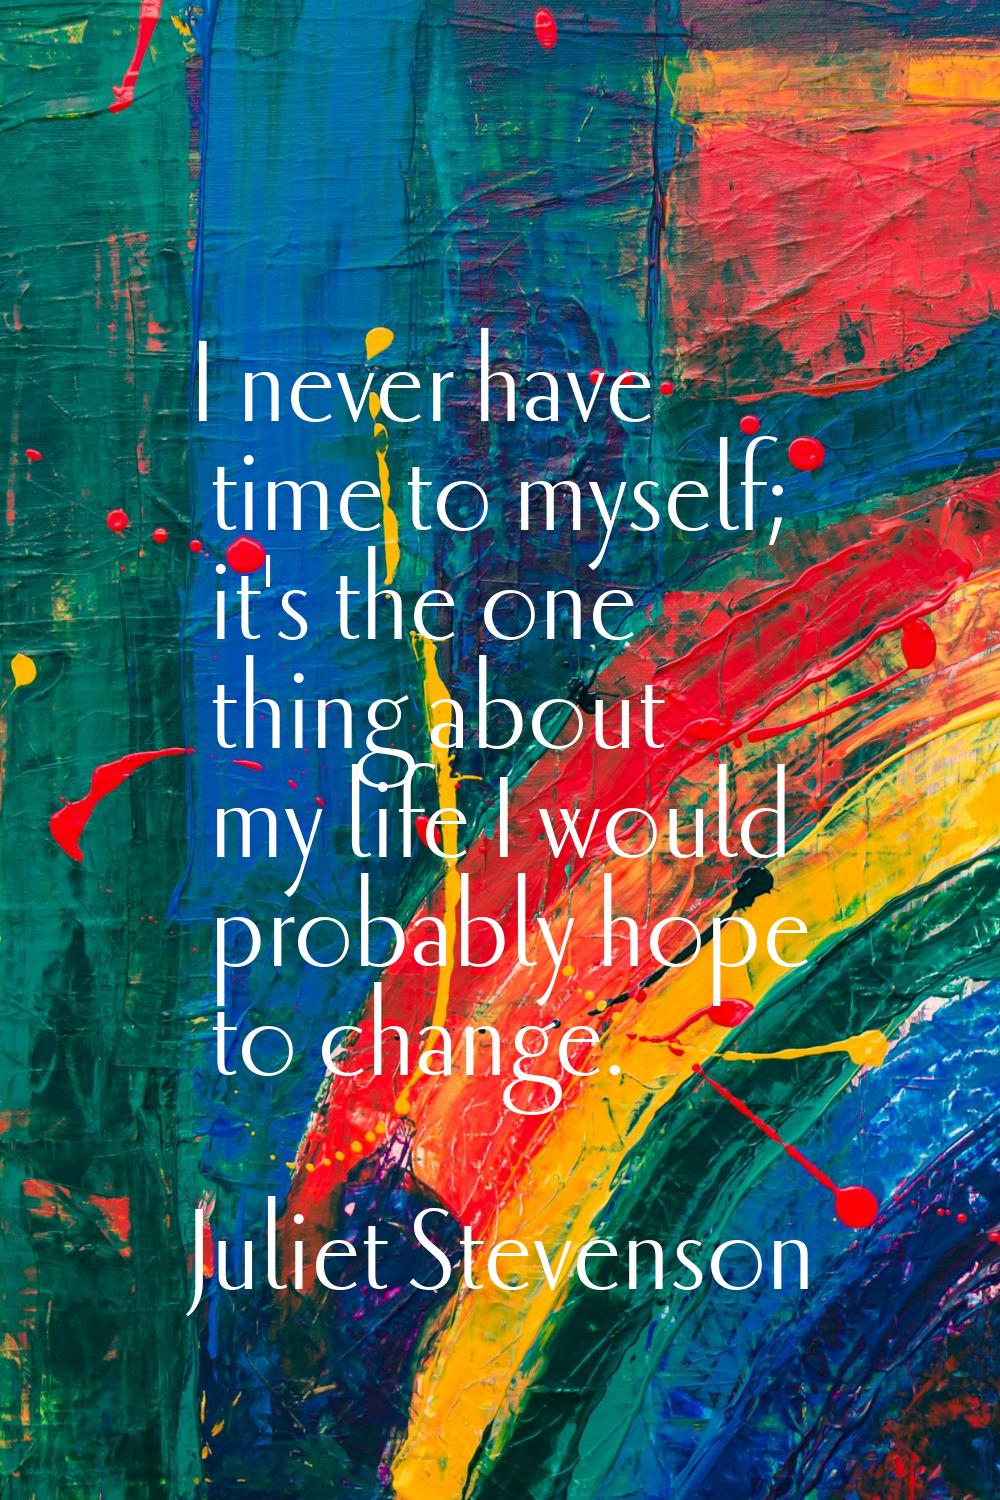 I never have time to myself; it's the one thing about my life I would probably hope to change.